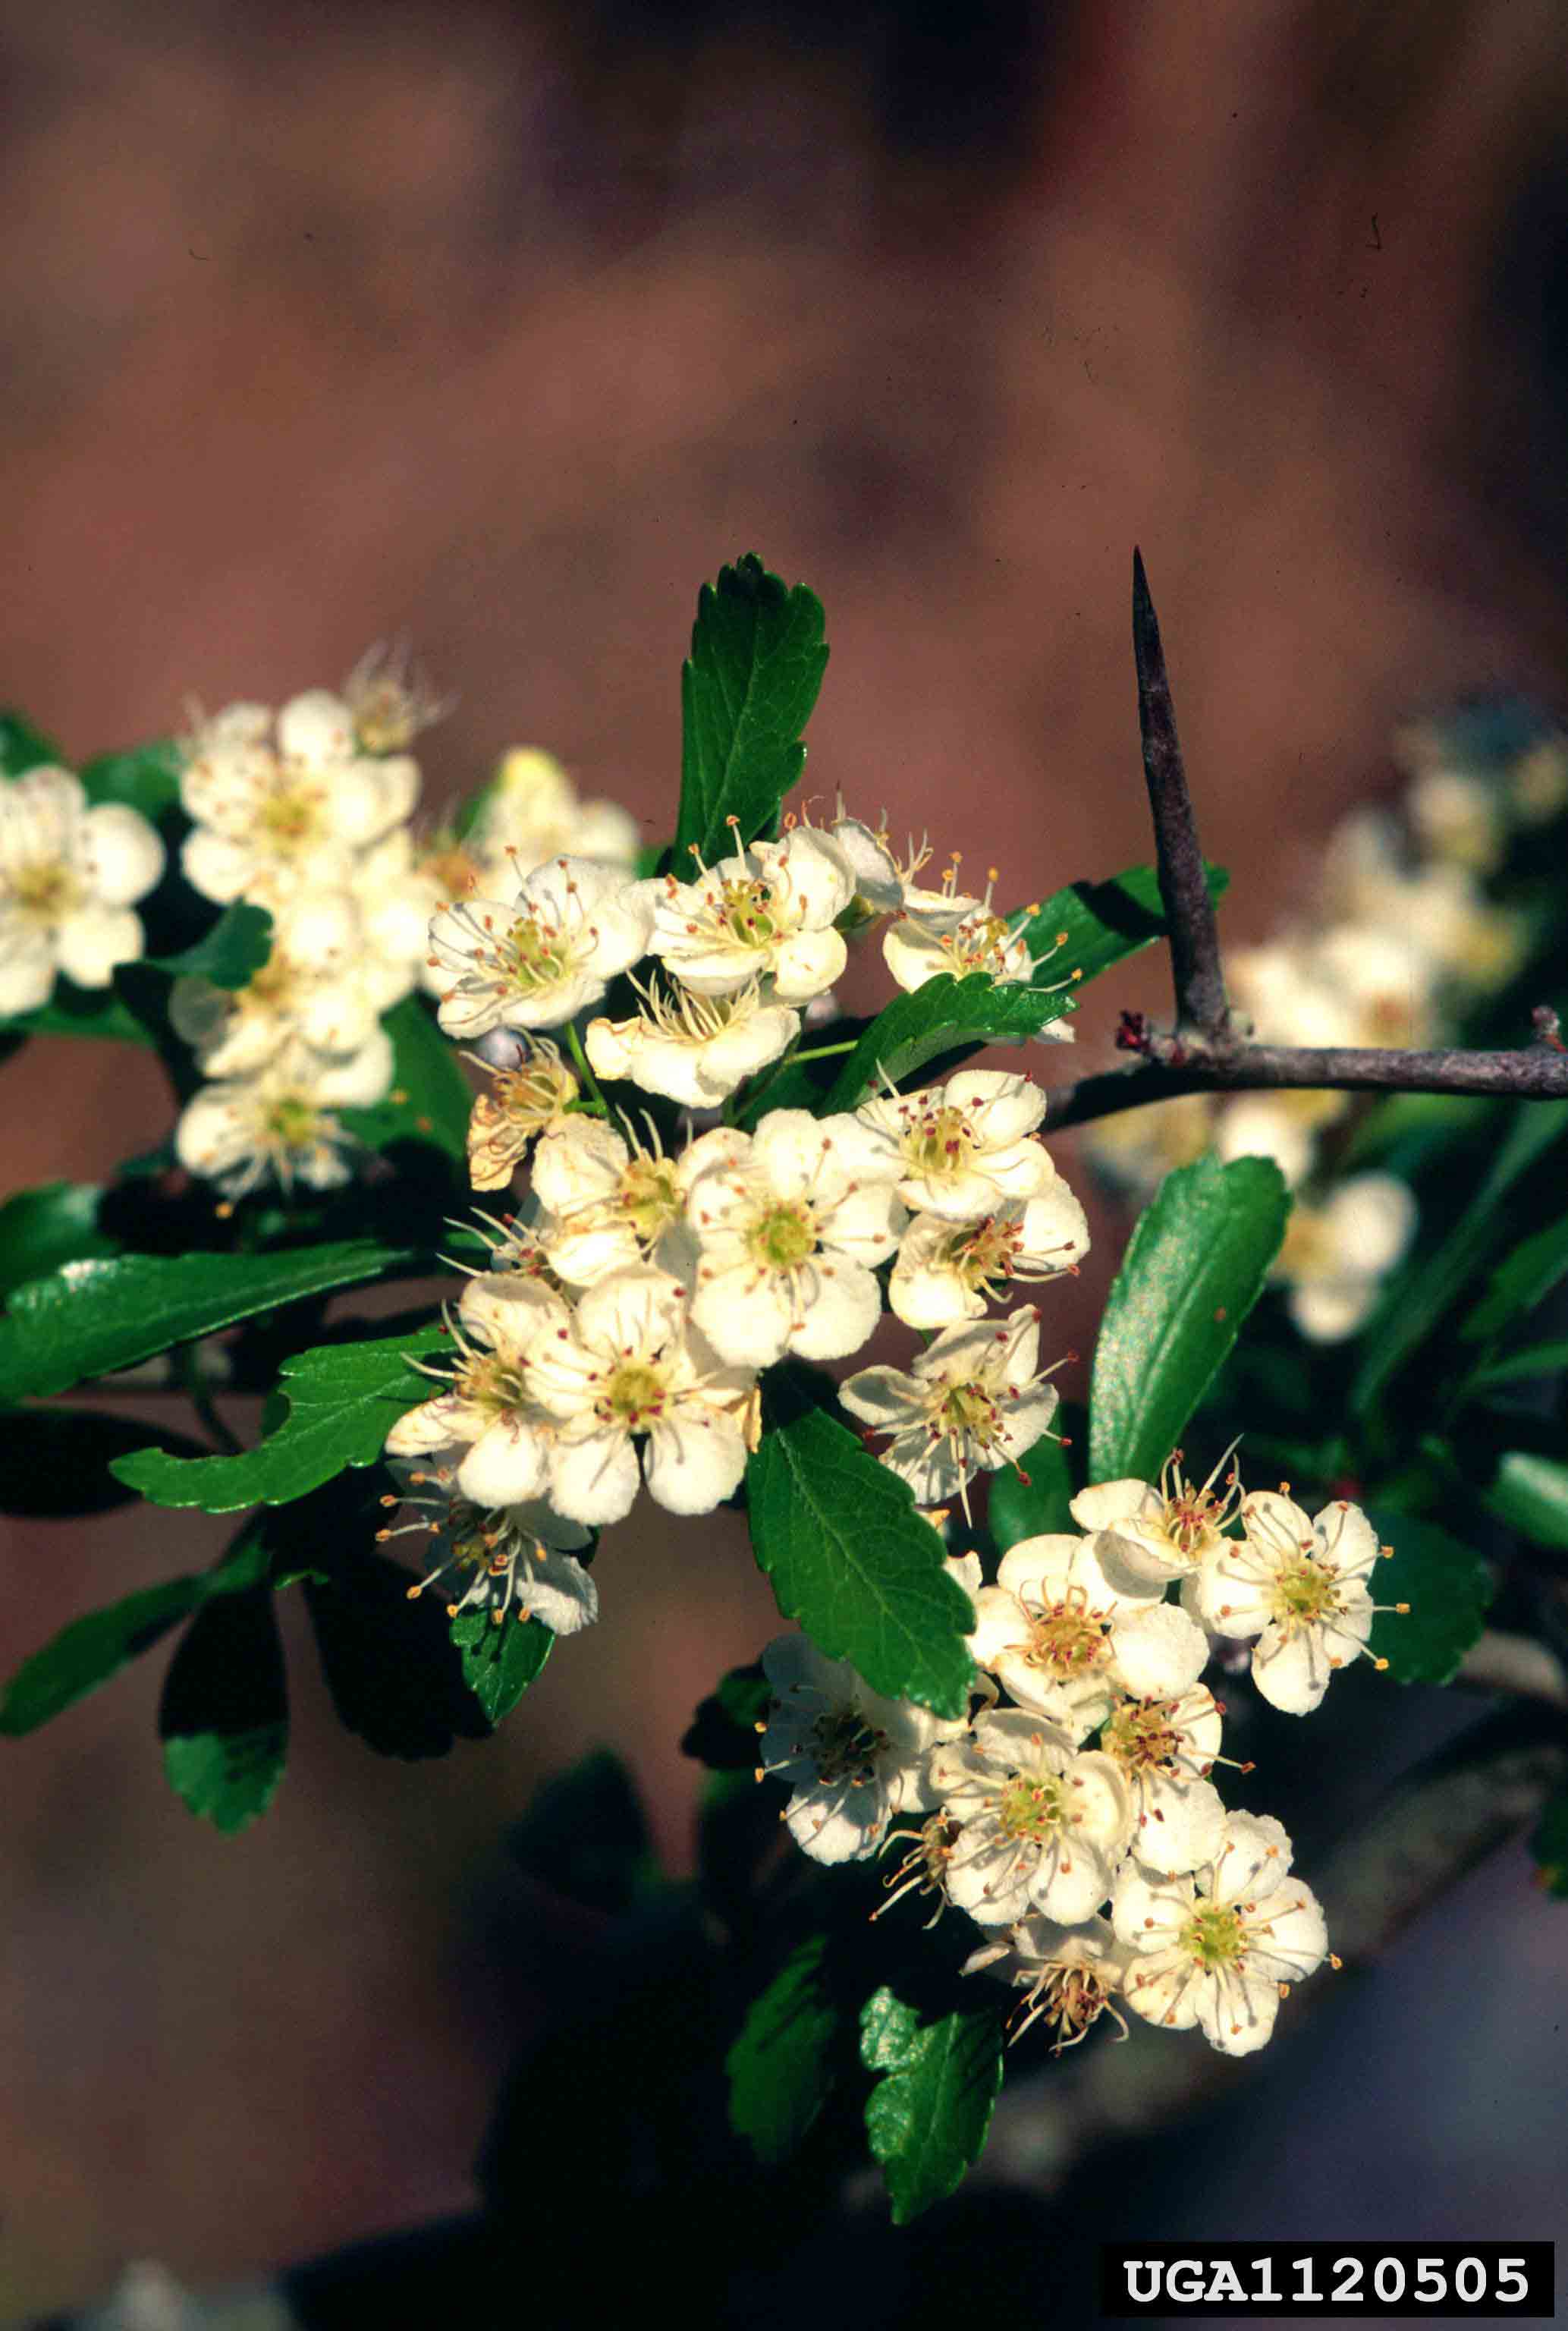 Littlehip or pasture hawthorn, showing flower, foliage, and thorn